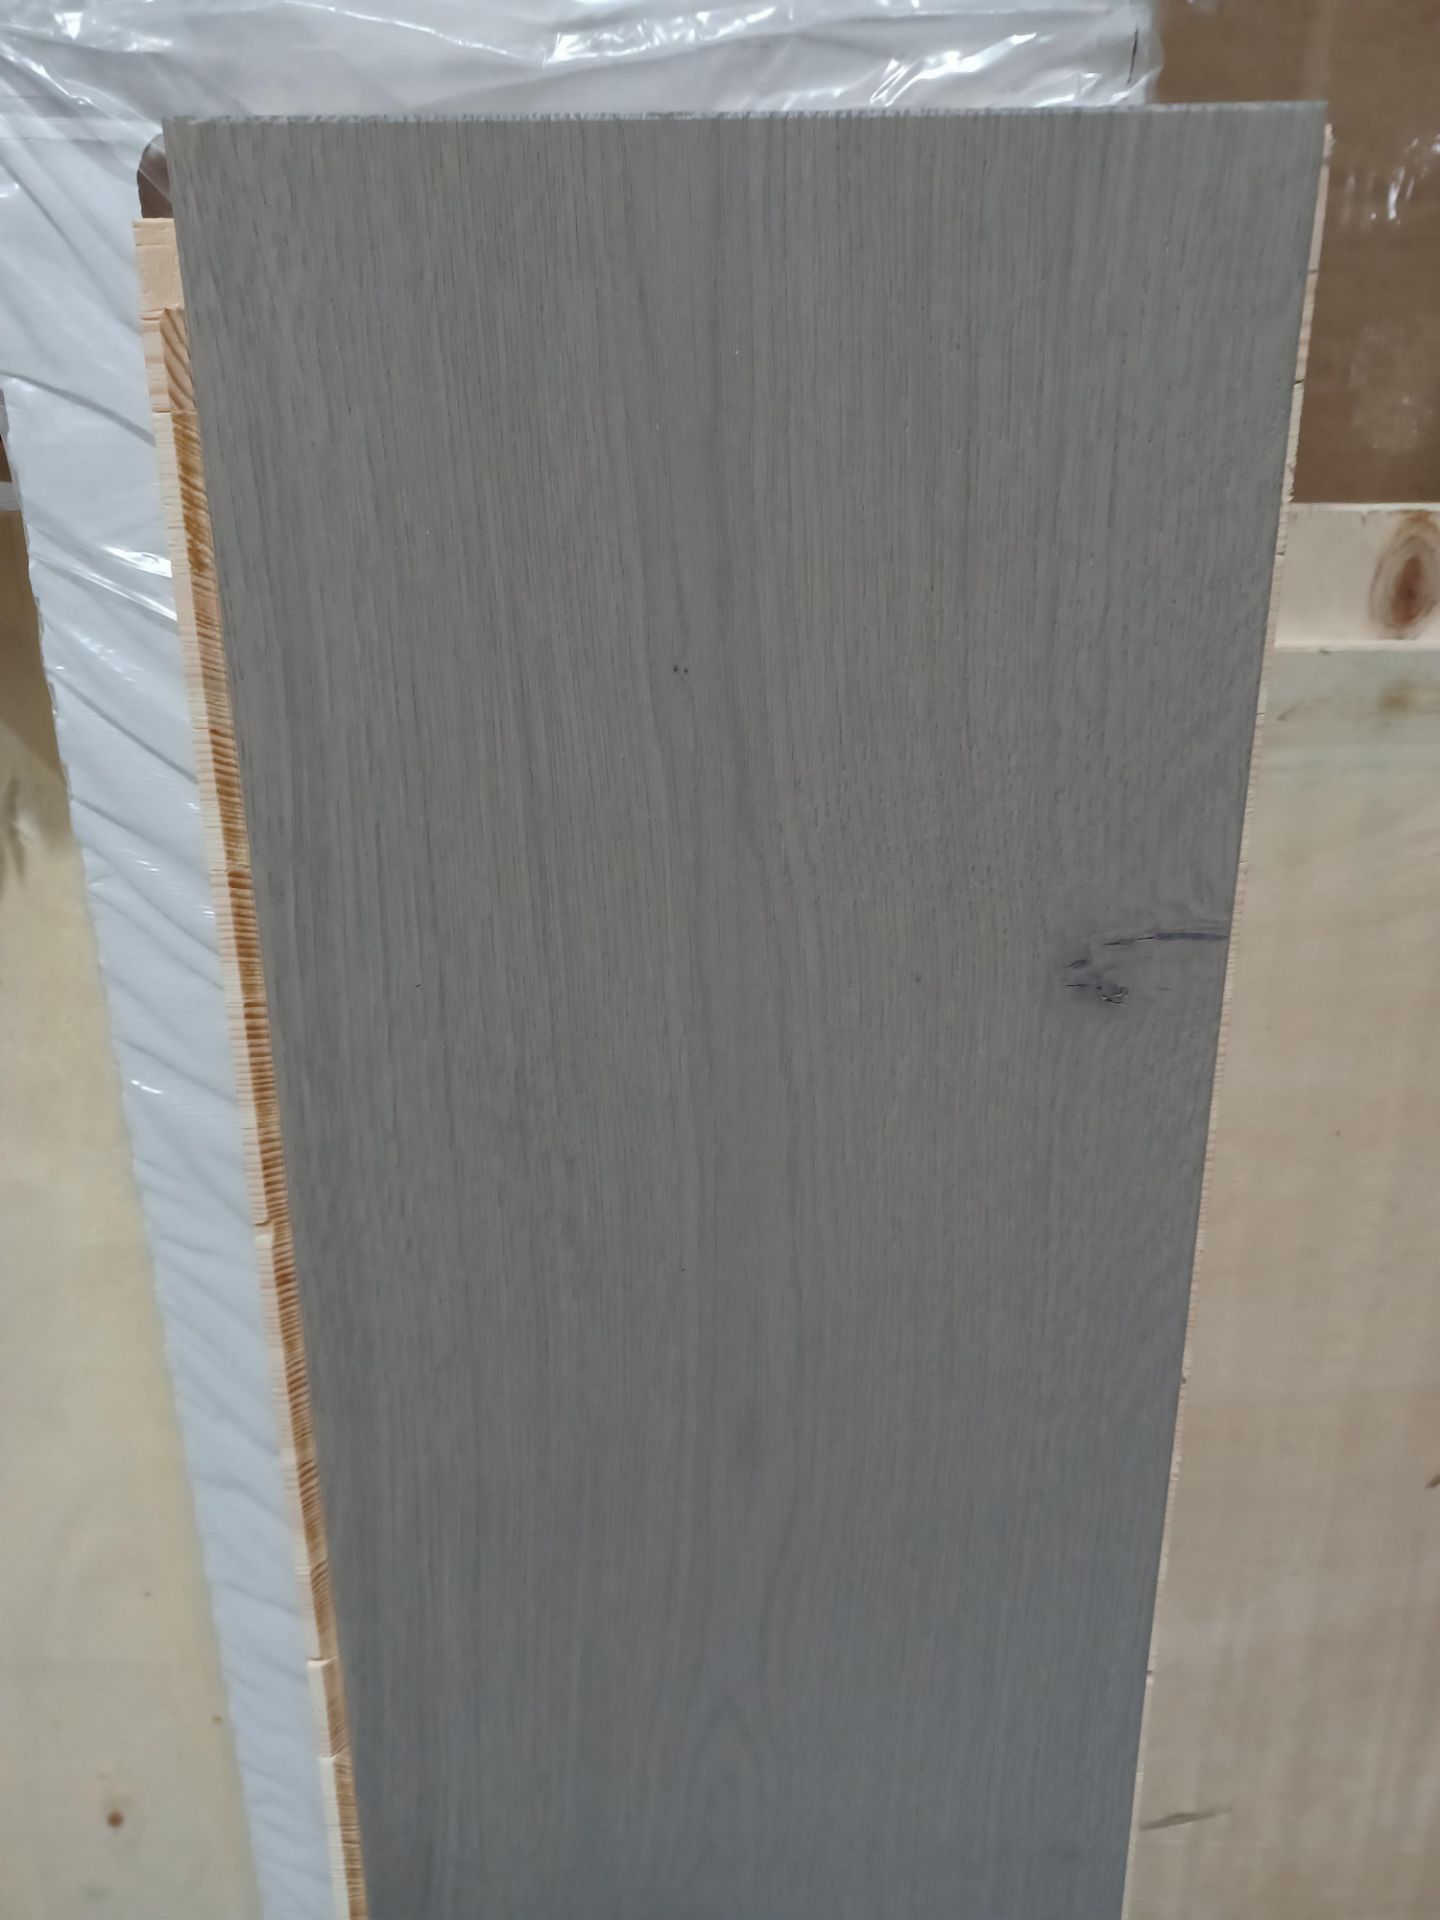 PALLET TO CONTAIN 24 x PACKS OF Nephin Oak Wood Oiled top layer flooring. EACH PACK CONTAINS 1.58m2, - Image 2 of 2